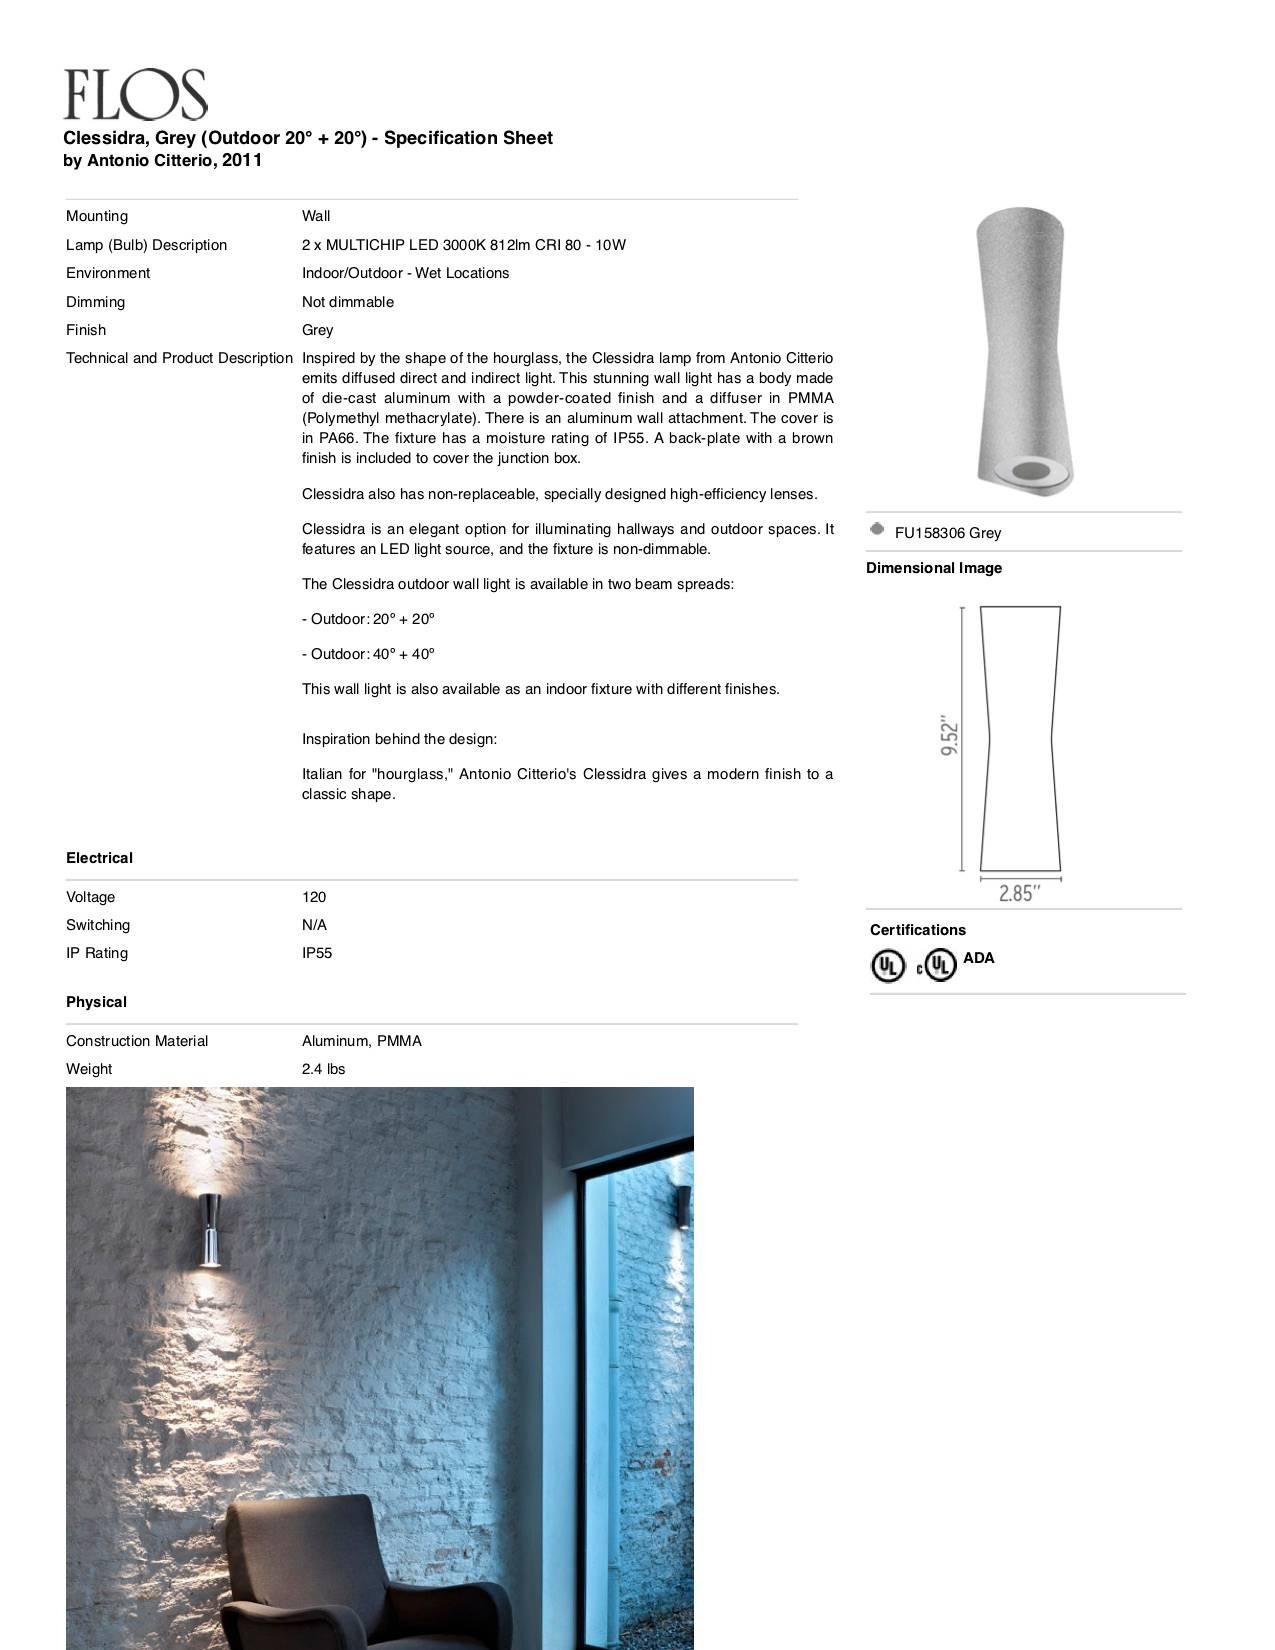 Modern FLOS Clessidra 20° + 20° Outdoor Wall Lamp in Grey by Antonio Citterio For Sale